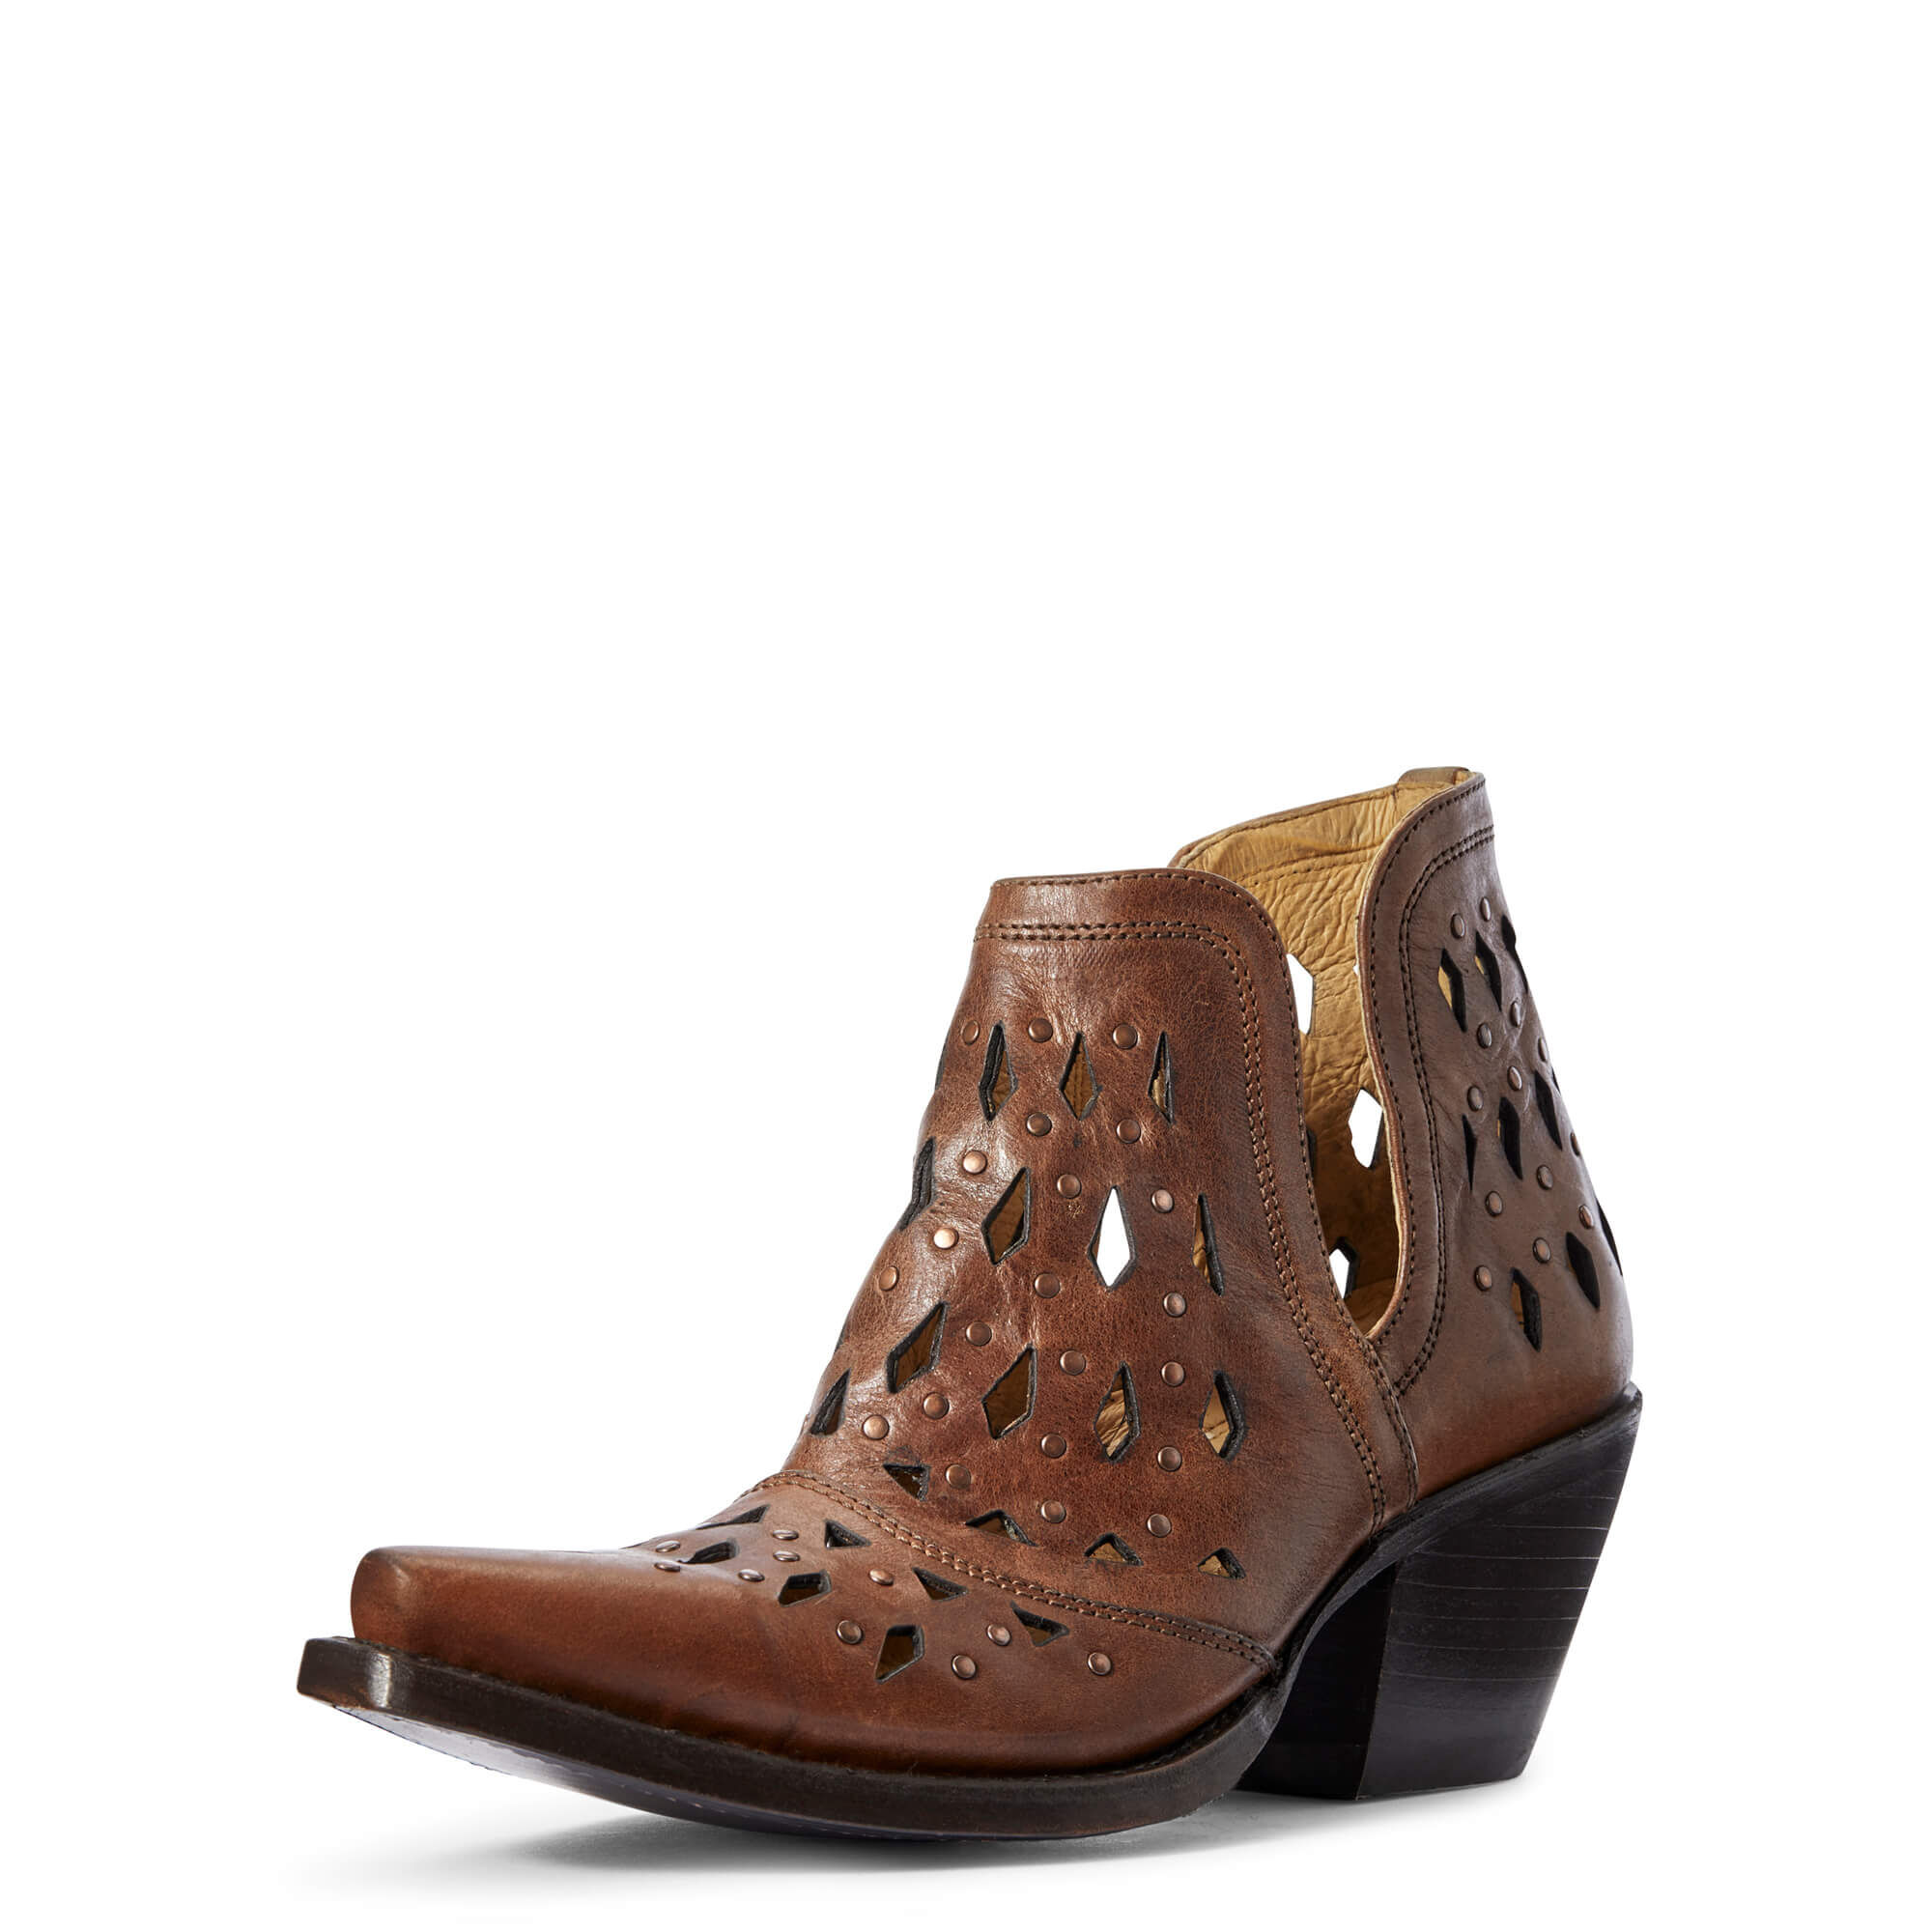 Women's Dixon Studded Western Boots in Amber Leather  by Ariat